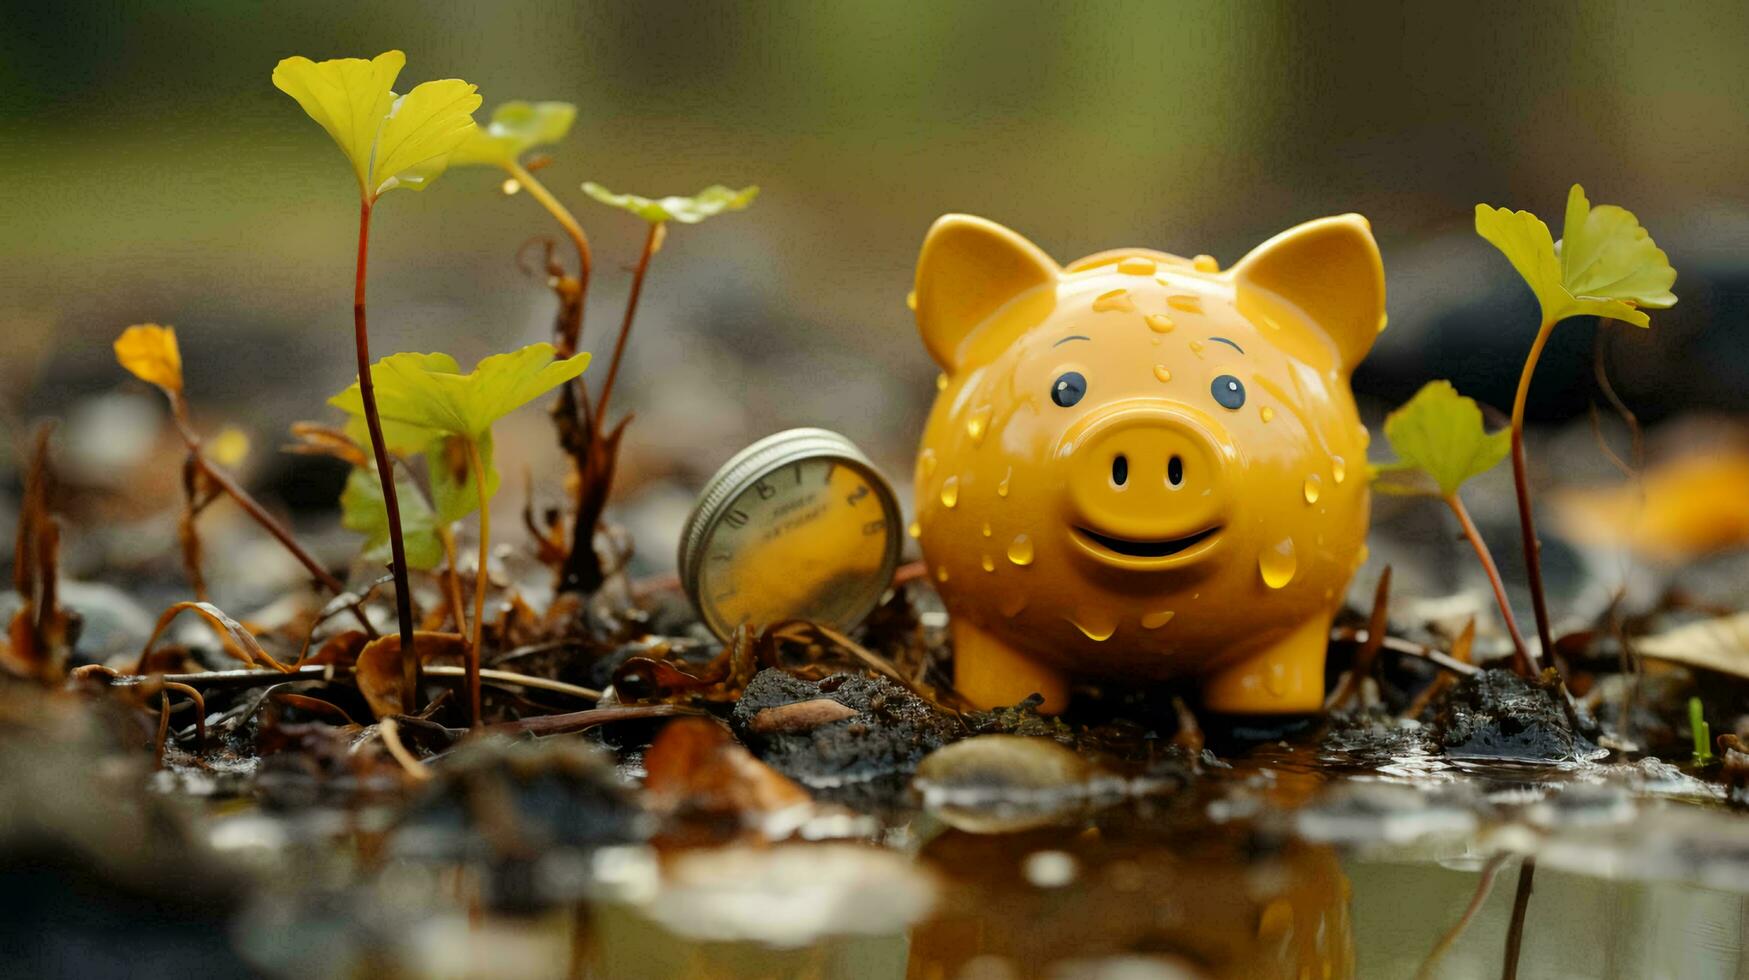 Piggy bank on coins. Concept of finance economy investment and accumulation of money photo